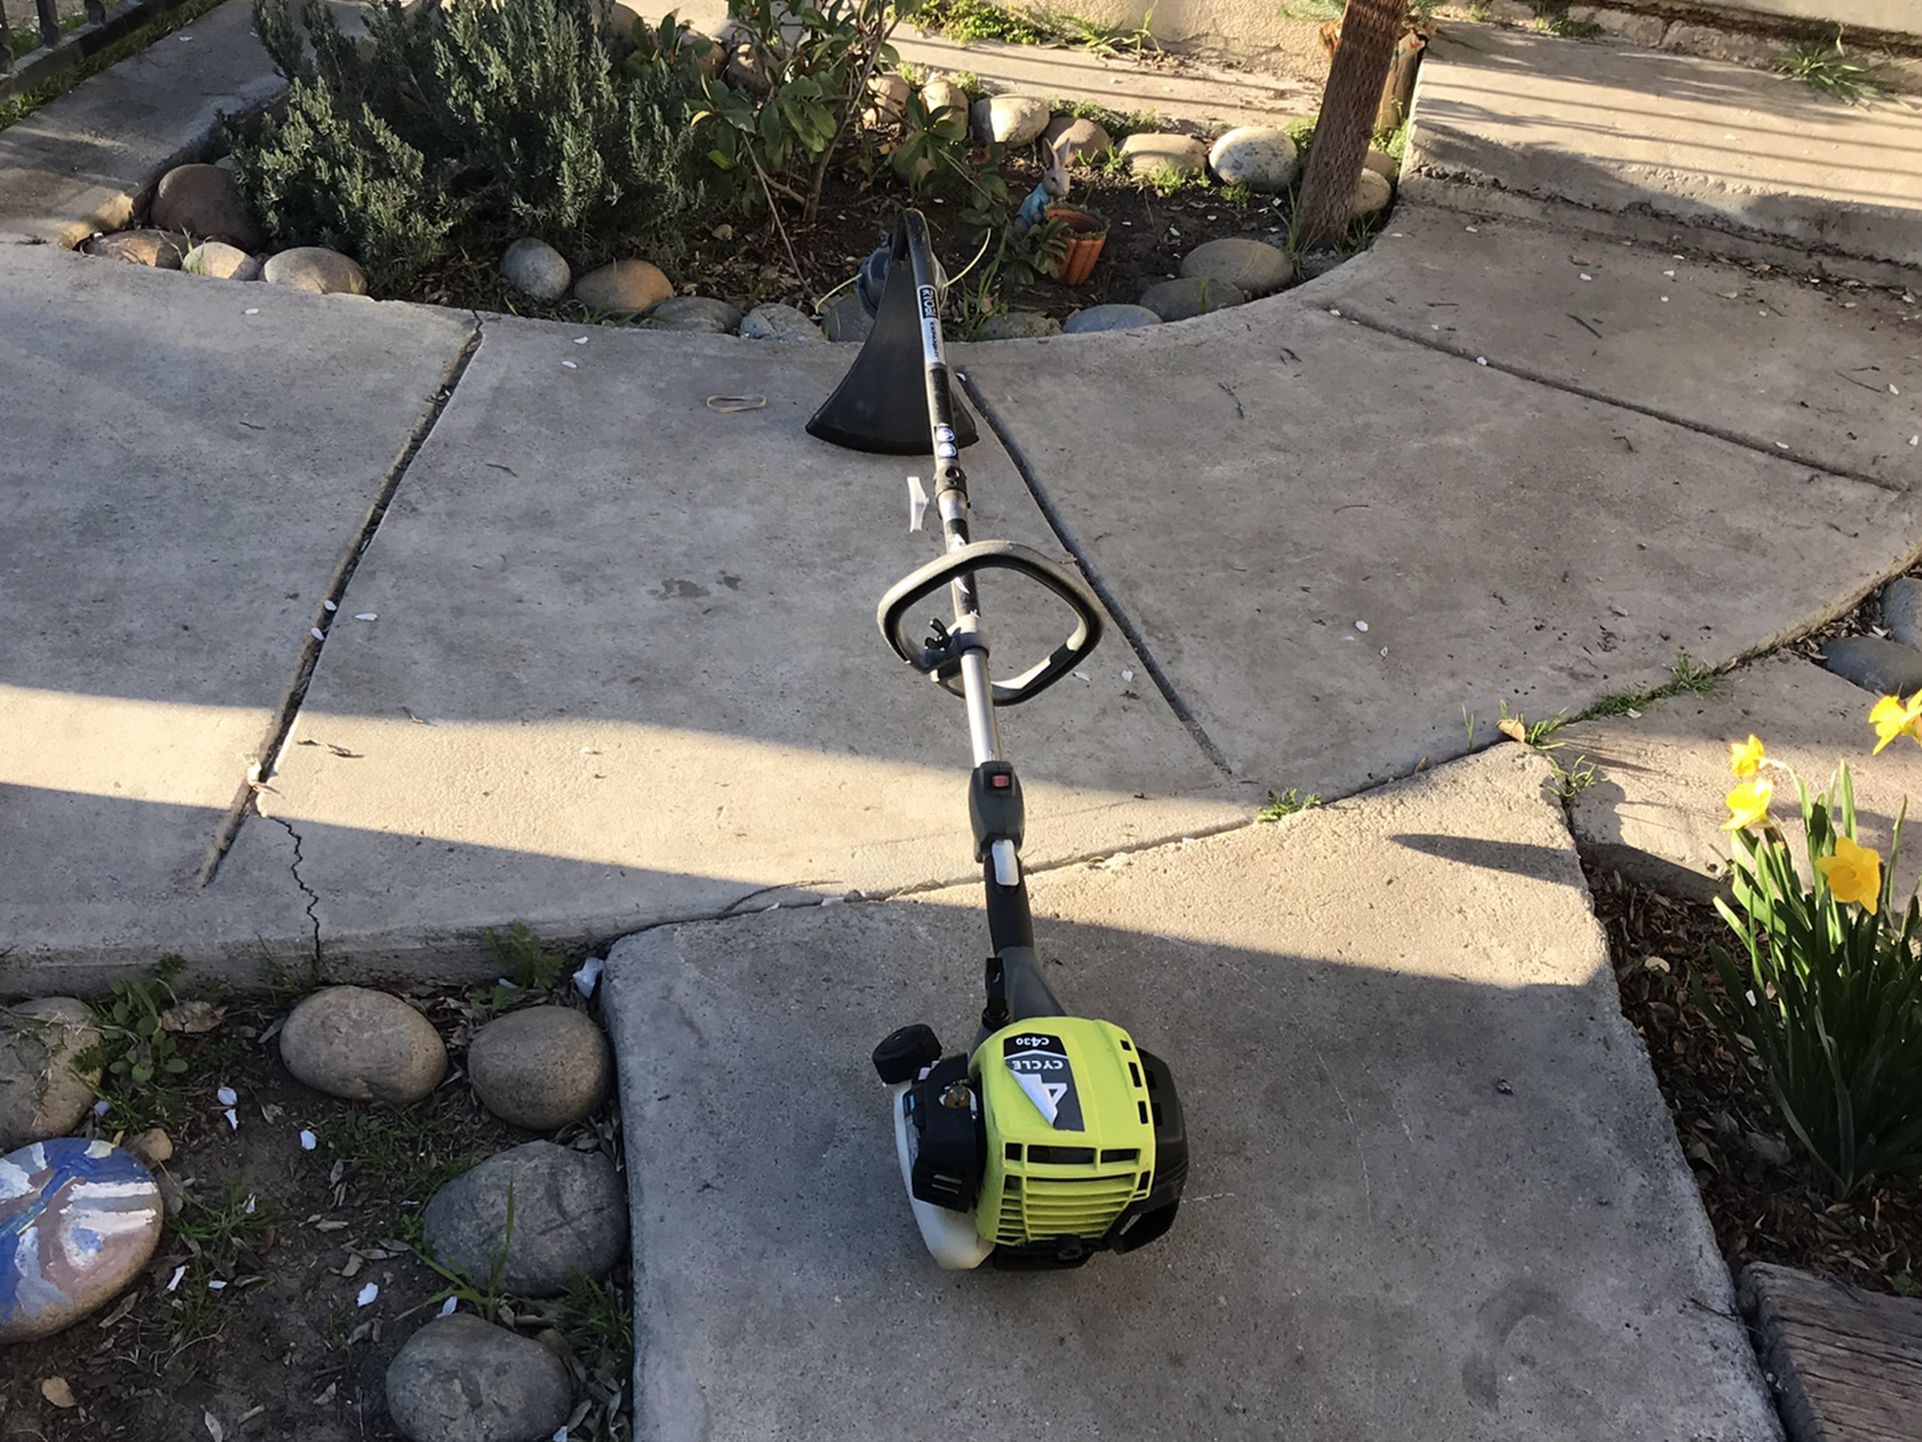 Ryobi 4 Cycle Weed Trimmer No Mixing Gas Only Works Great